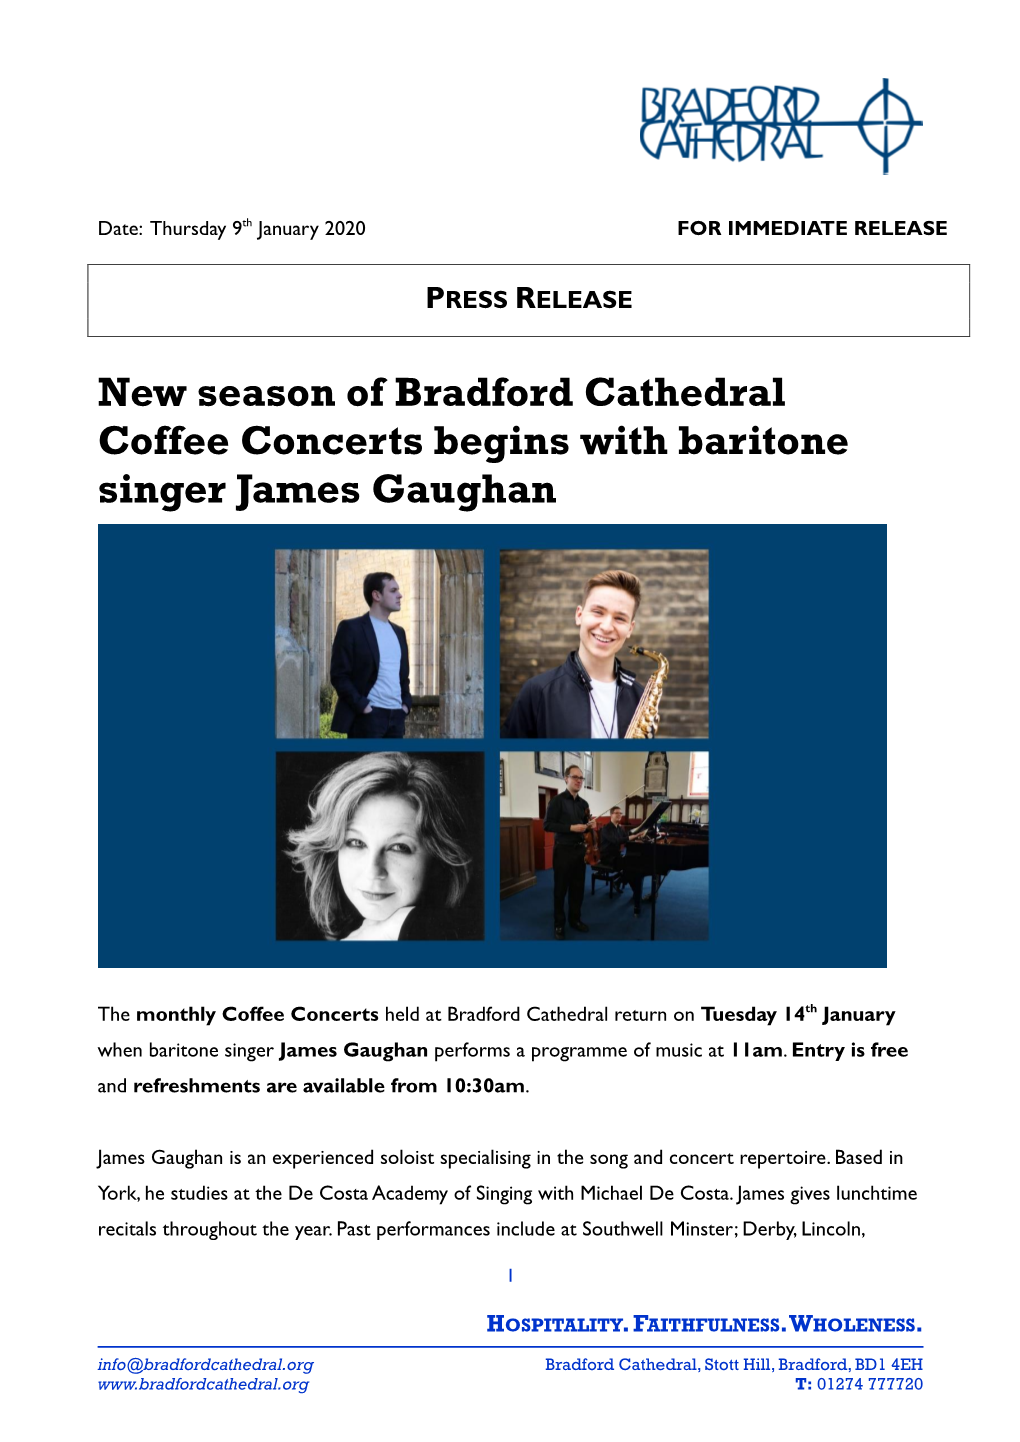 New Season of Bradford Cathedral Coffee Concerts Begins with Baritone Singer James Gaughan